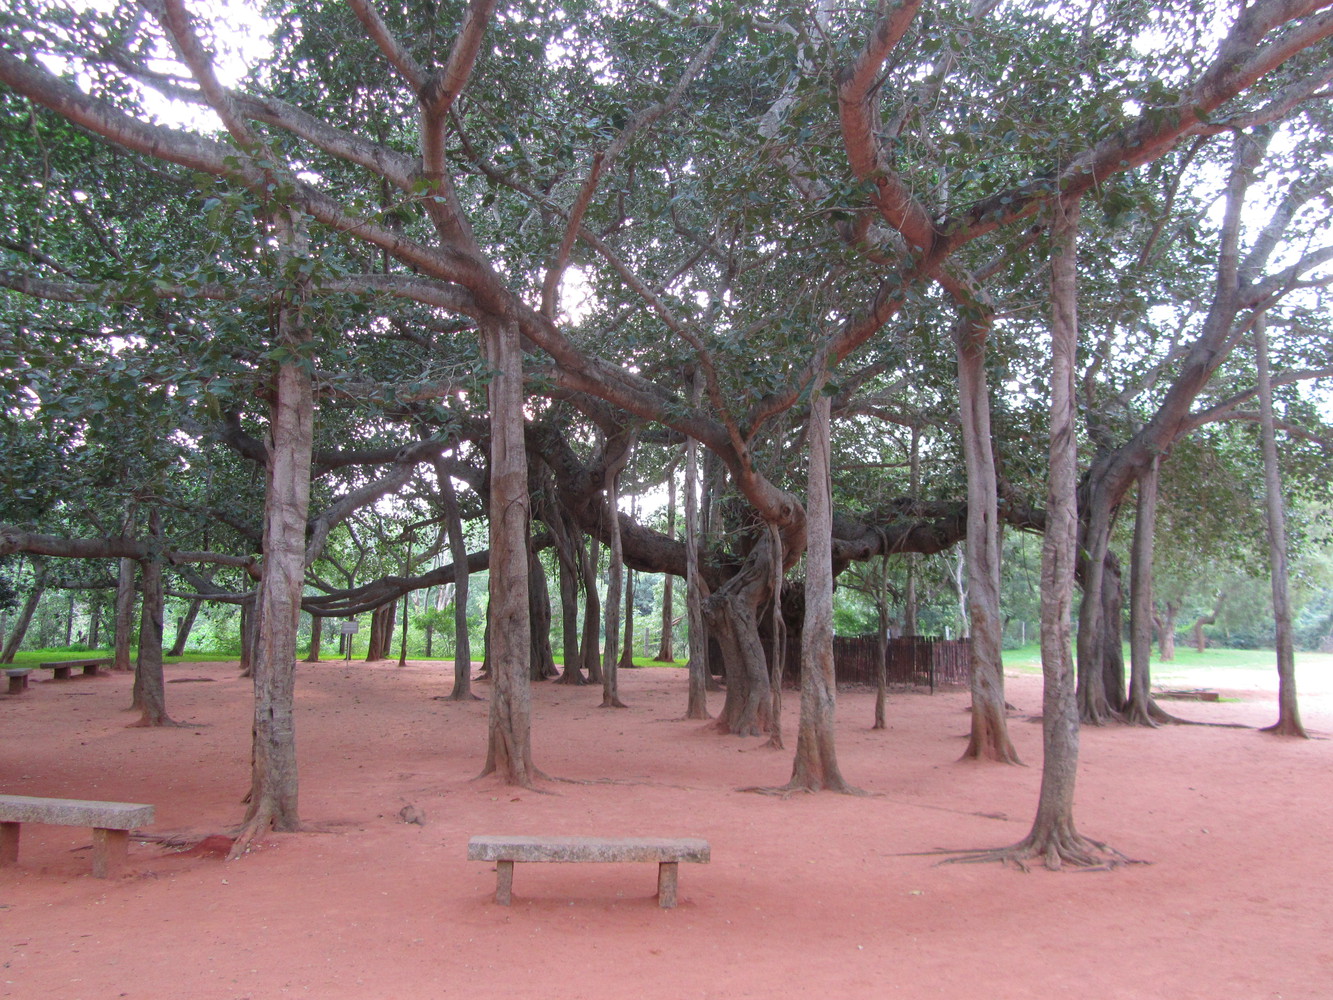 A large banyan tree with a dense network of branches above with more than thirty thick roots extending from them down toward the ground thereby appearing to have multiple trunks all around the actual trunk of the tree